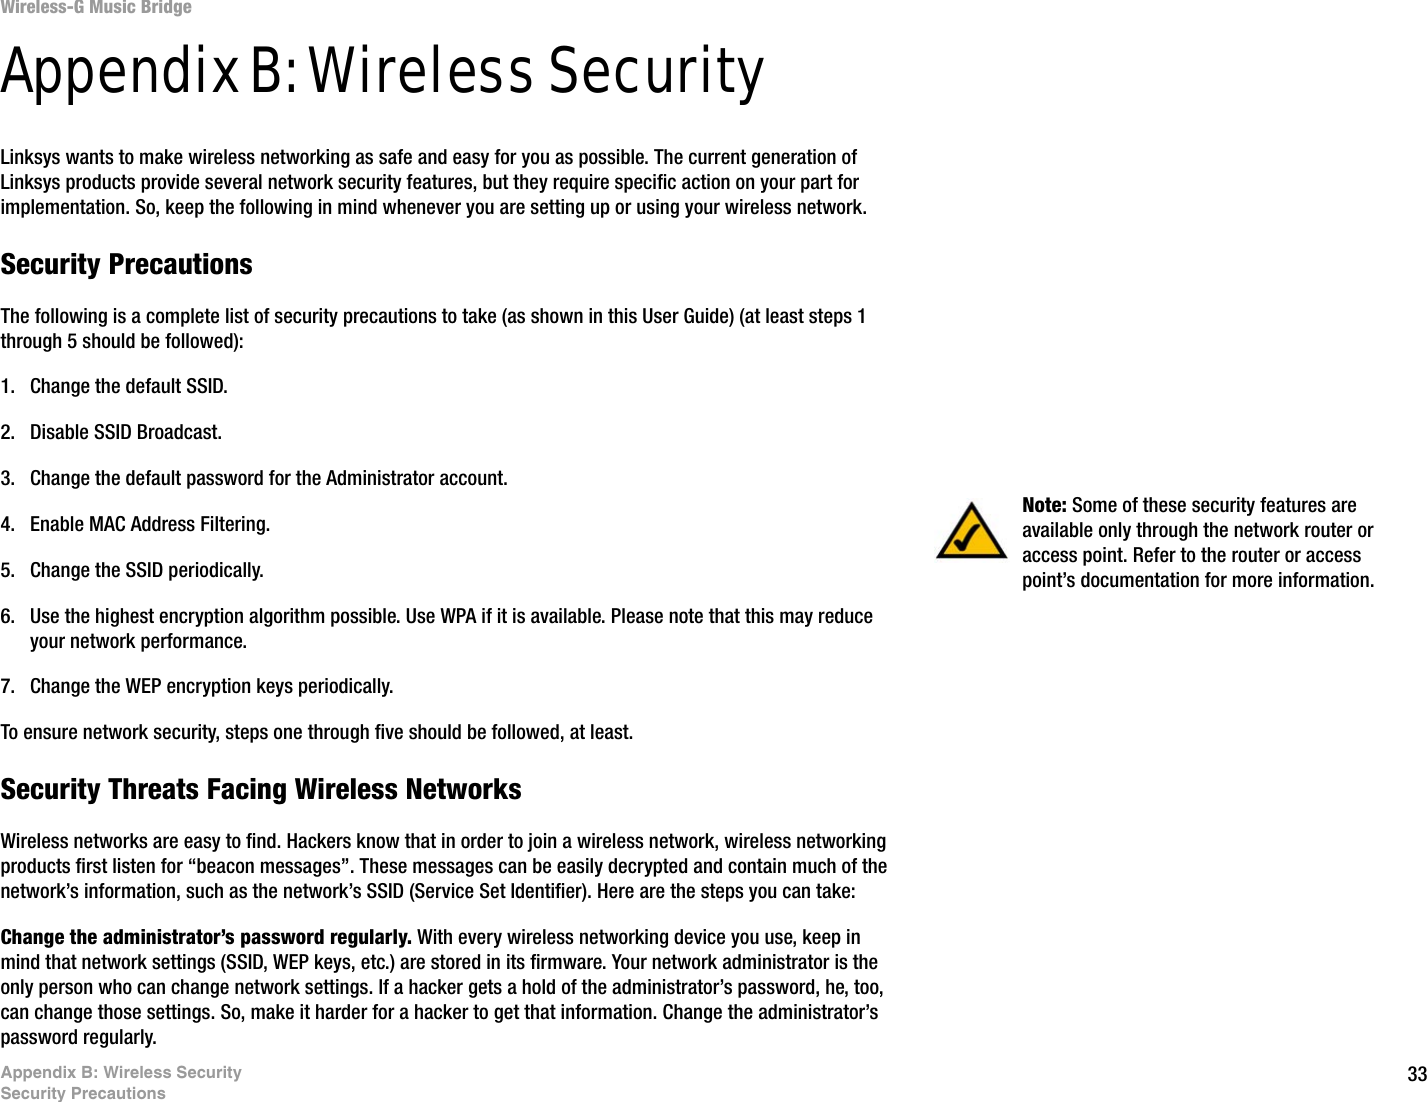 33Appendix B: Wireless SecuritySecurity PrecautionsWireless-G Music BridgeAppendix B: Wireless SecurityLinksys wants to make wireless networking as safe and easy for you as possible. The current generation of Linksys products provide several network security features, but they require specific action on your part for implementation. So, keep the following in mind whenever you are setting up or using your wireless network.Security PrecautionsThe following is a complete list of security precautions to take (as shown in this User Guide) (at least steps 1 through 5 should be followed):1. Change the default SSID. 2. Disable SSID Broadcast. 3. Change the default password for the Administrator account. 4. Enable MAC Address Filtering. 5. Change the SSID periodically. 6. Use the highest encryption algorithm possible. Use WPA if it is available. Please note that this may reduce your network performance. 7. Change the WEP encryption keys periodically. To ensure network security, steps one through five should be followed, at least.Security Threats Facing Wireless Networks Wireless networks are easy to find. Hackers know that in order to join a wireless network, wireless networking products first listen for “beacon messages”. These messages can be easily decrypted and contain much of the network’s information, such as the network’s SSID (Service Set Identifier). Here are the steps you can take:Change the administrator’s password regularly. With every wireless networking device you use, keep in mind that network settings (SSID, WEP keys, etc.) are stored in its firmware. Your network administrator is the only person who can change network settings. If a hacker gets a hold of the administrator’s password, he, too, can change those settings. So, make it harder for a hacker to get that information. Change the administrator’s password regularly.Note: Some of these security features are available only through the network router or access point. Refer to the router or access point’s documentation for more information.